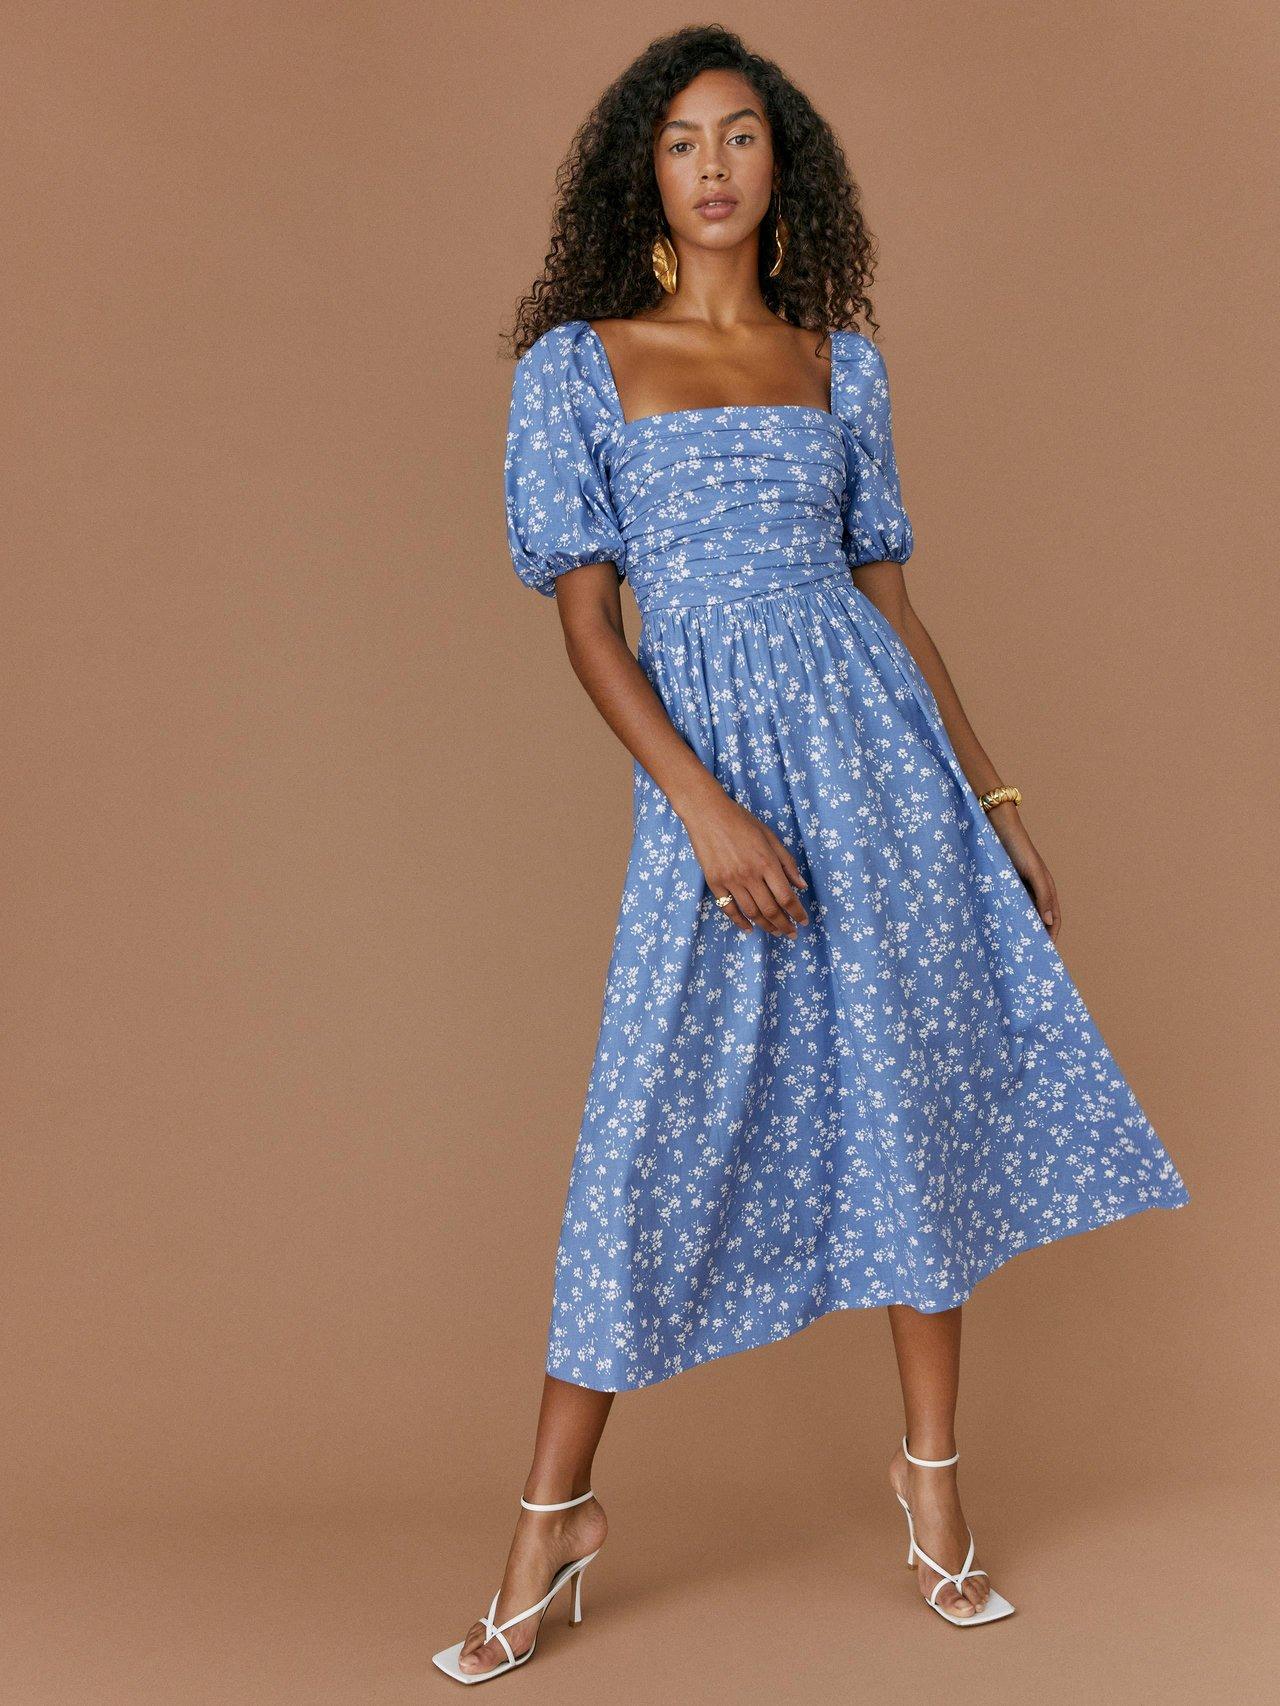 51 Best Summer Wedding Guest Dresses in Every Style